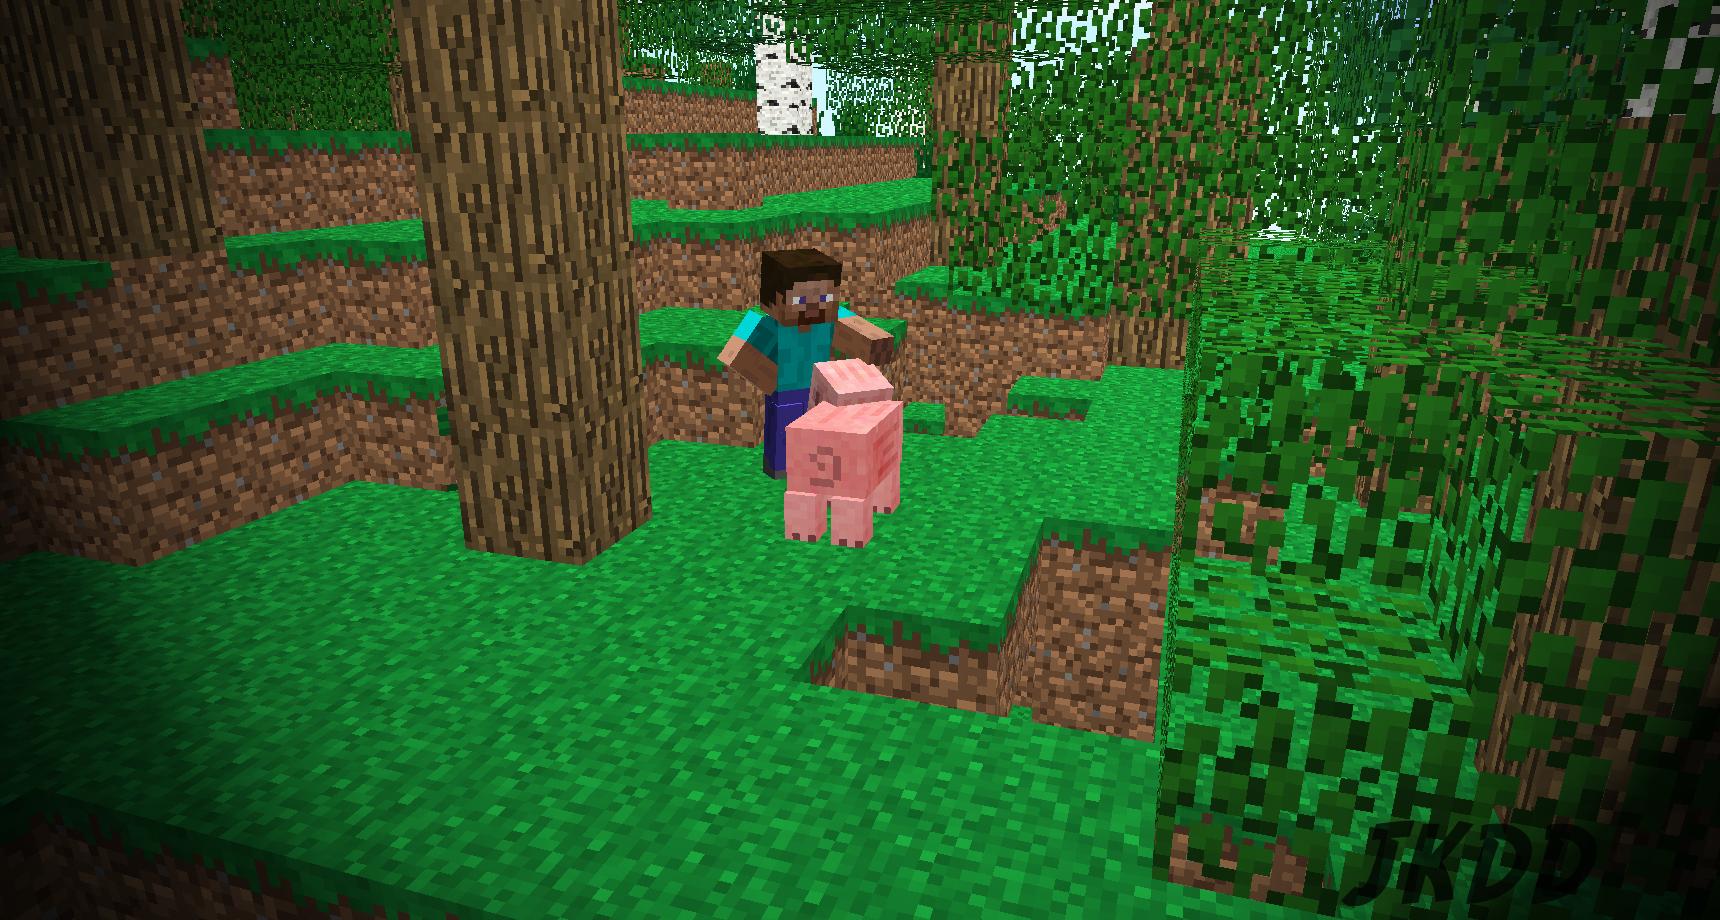 Steve and his Pig - Minecraft Wallpaper - Wallpapers and art ...